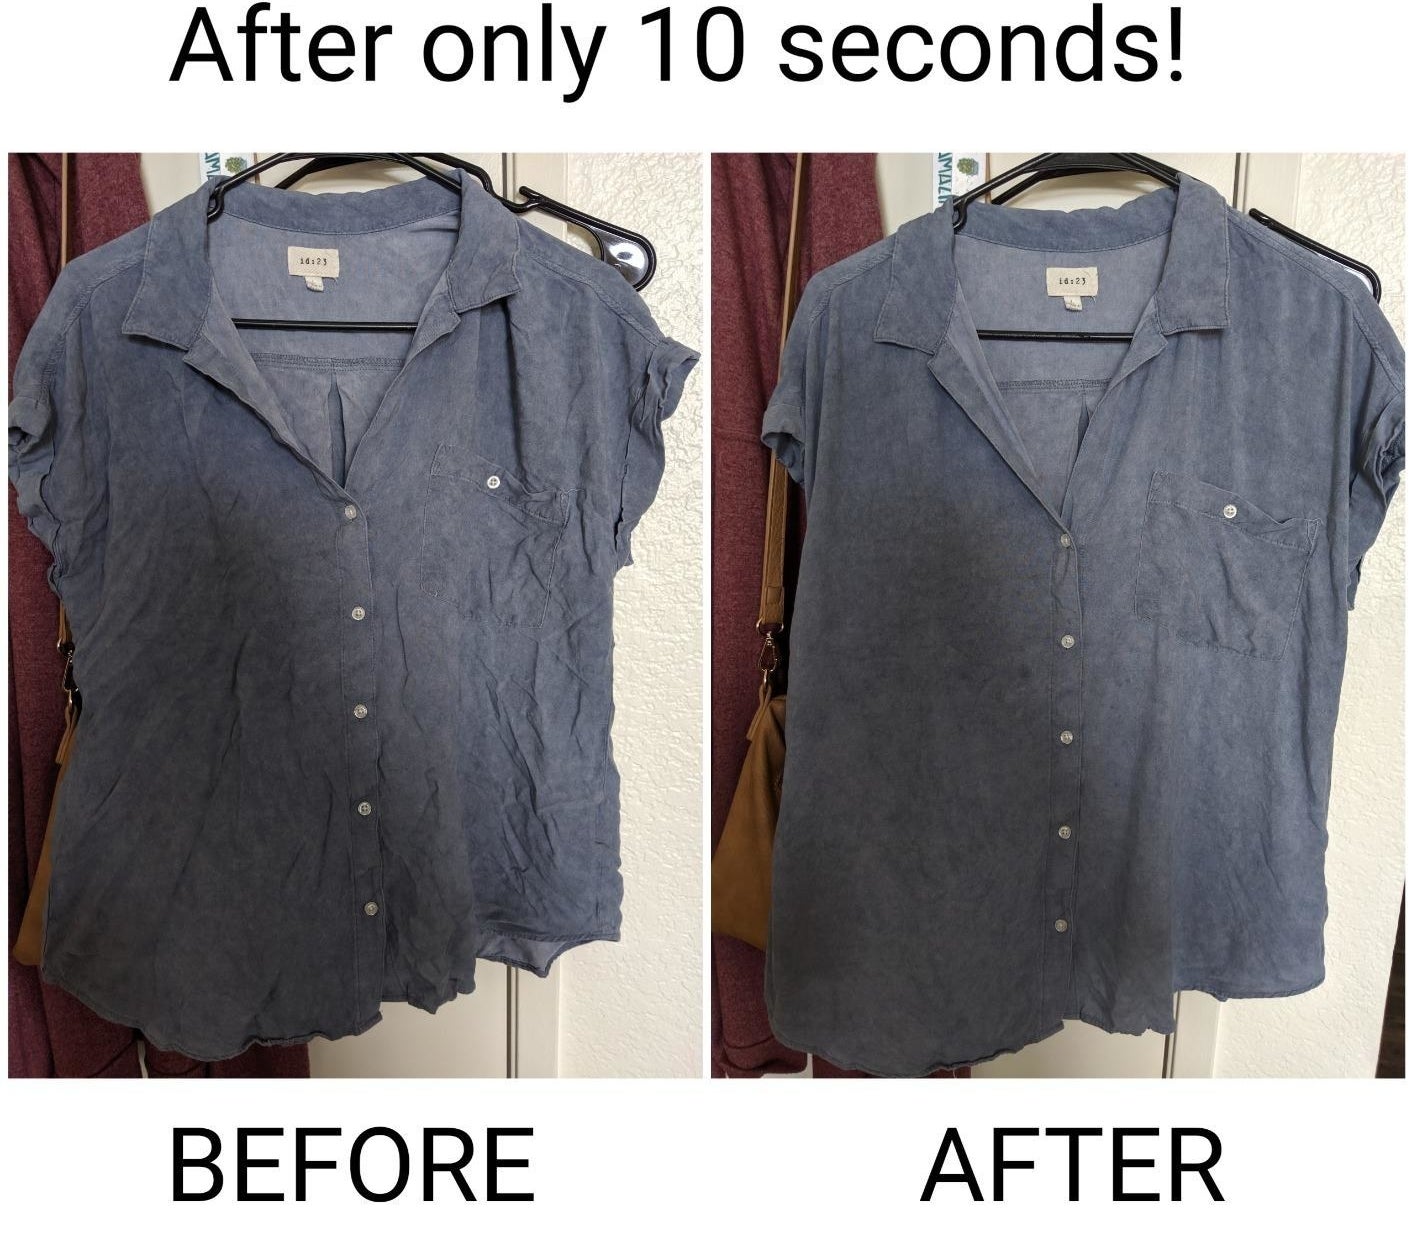 a shirt with wrinkles before the spray and after the spray with no wrinkles